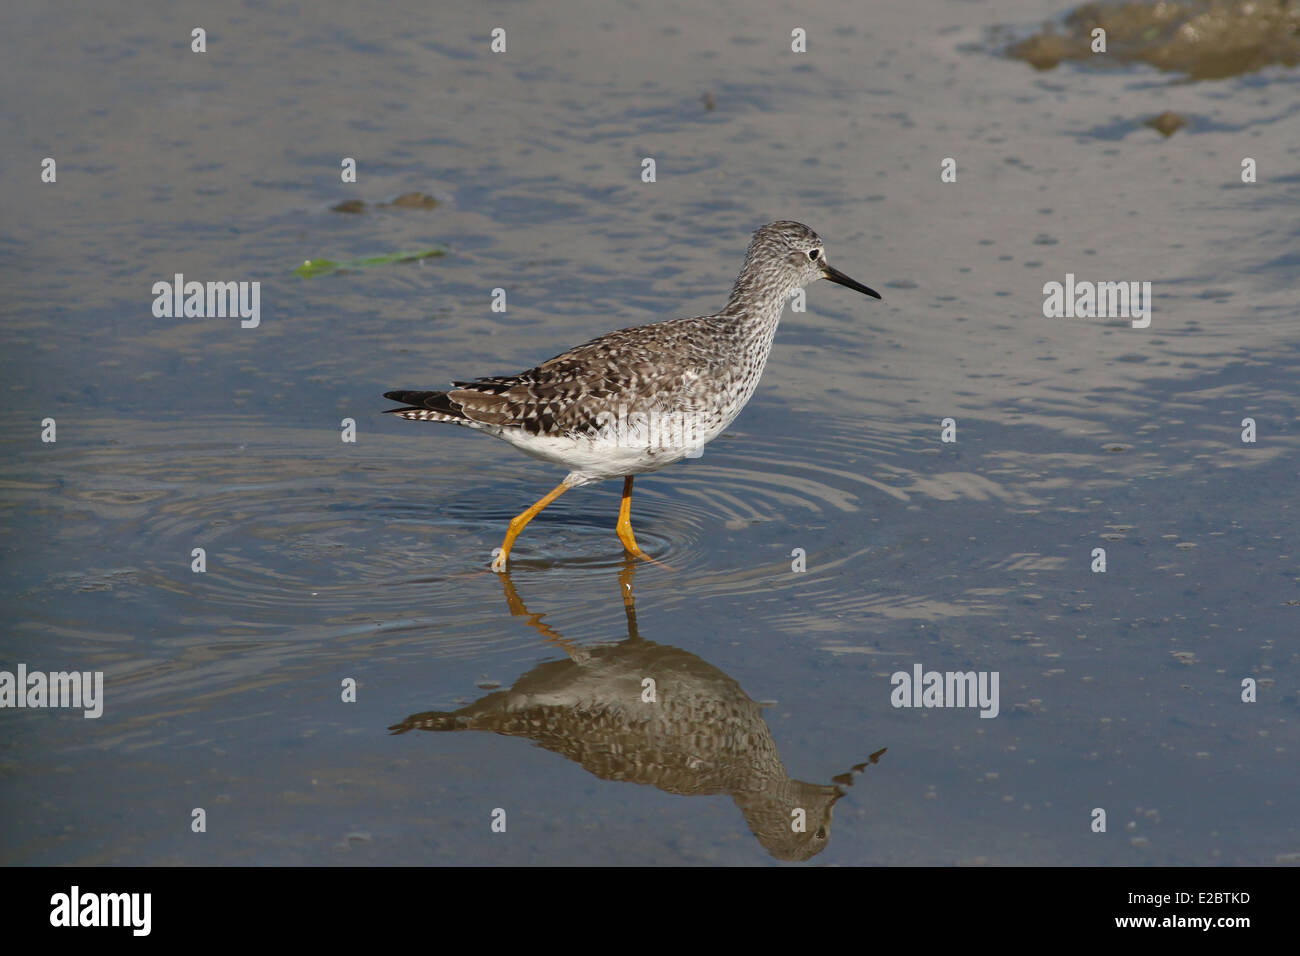 Series of 12 close-ups of the rare Lesser Yellowlegs (Tringa flavipes) wading bird in the Northern Netherlands Stock Photo